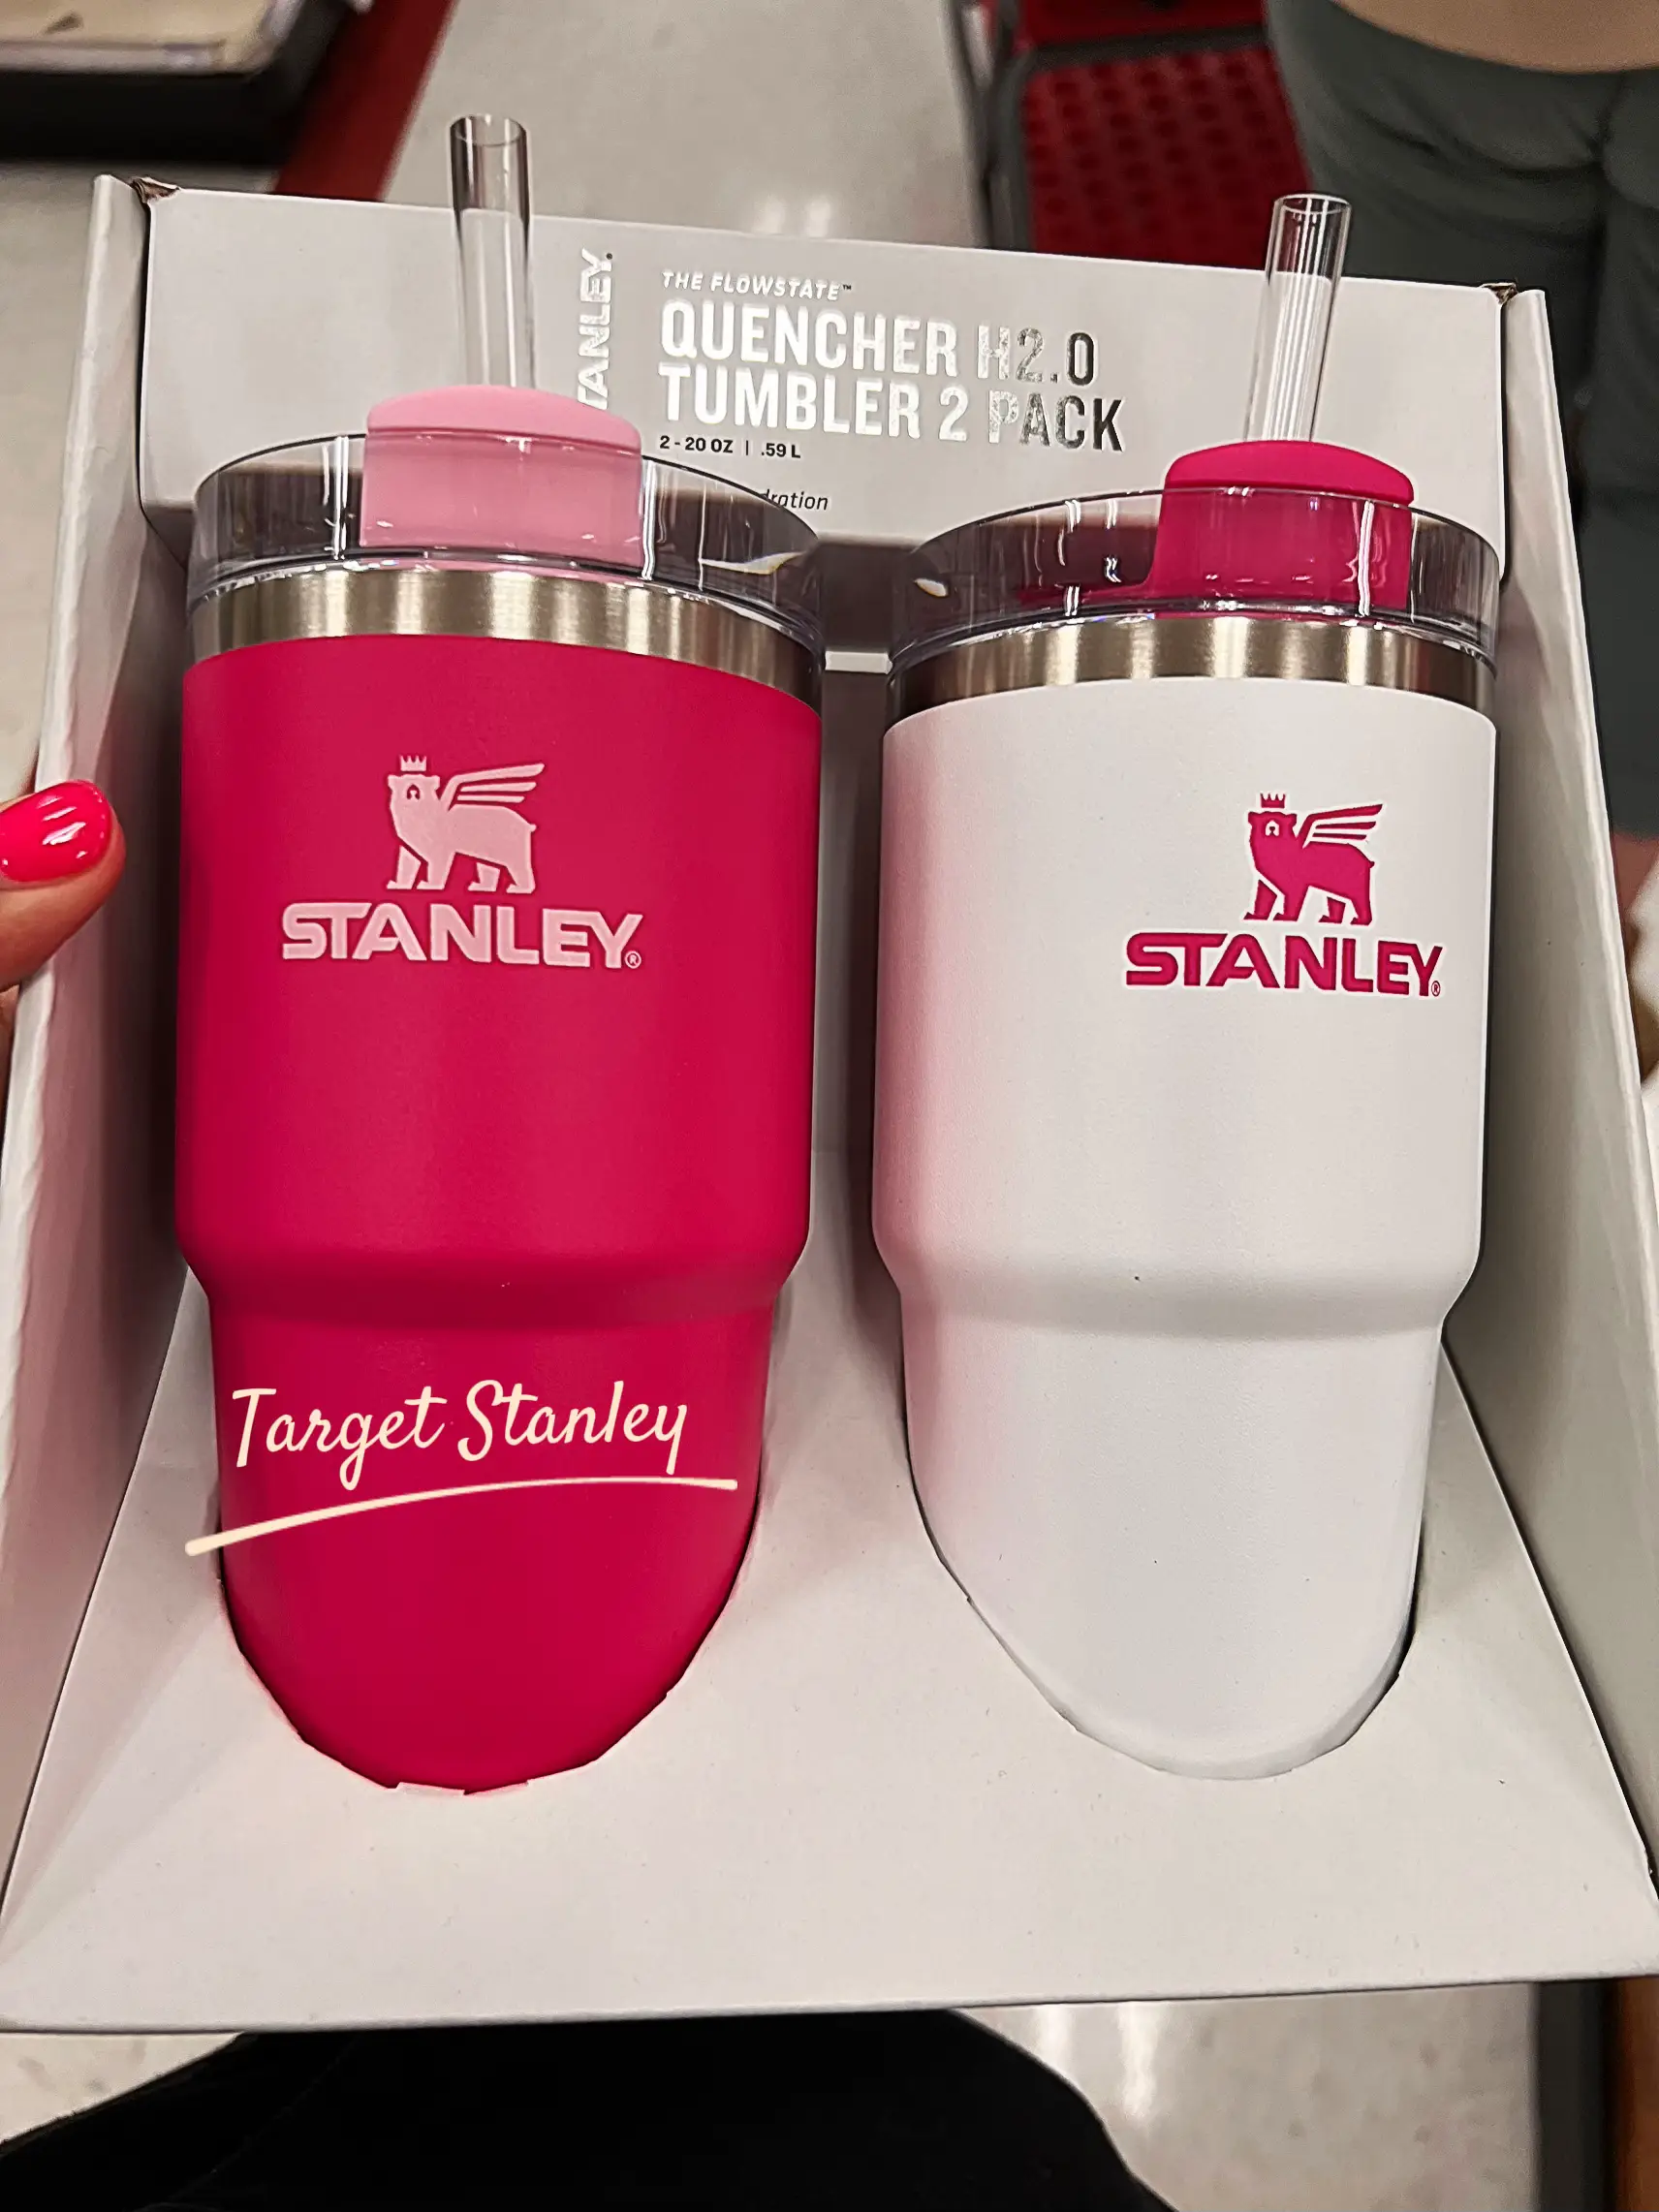 Got the stanley #stanleycup #review #target #tumbler